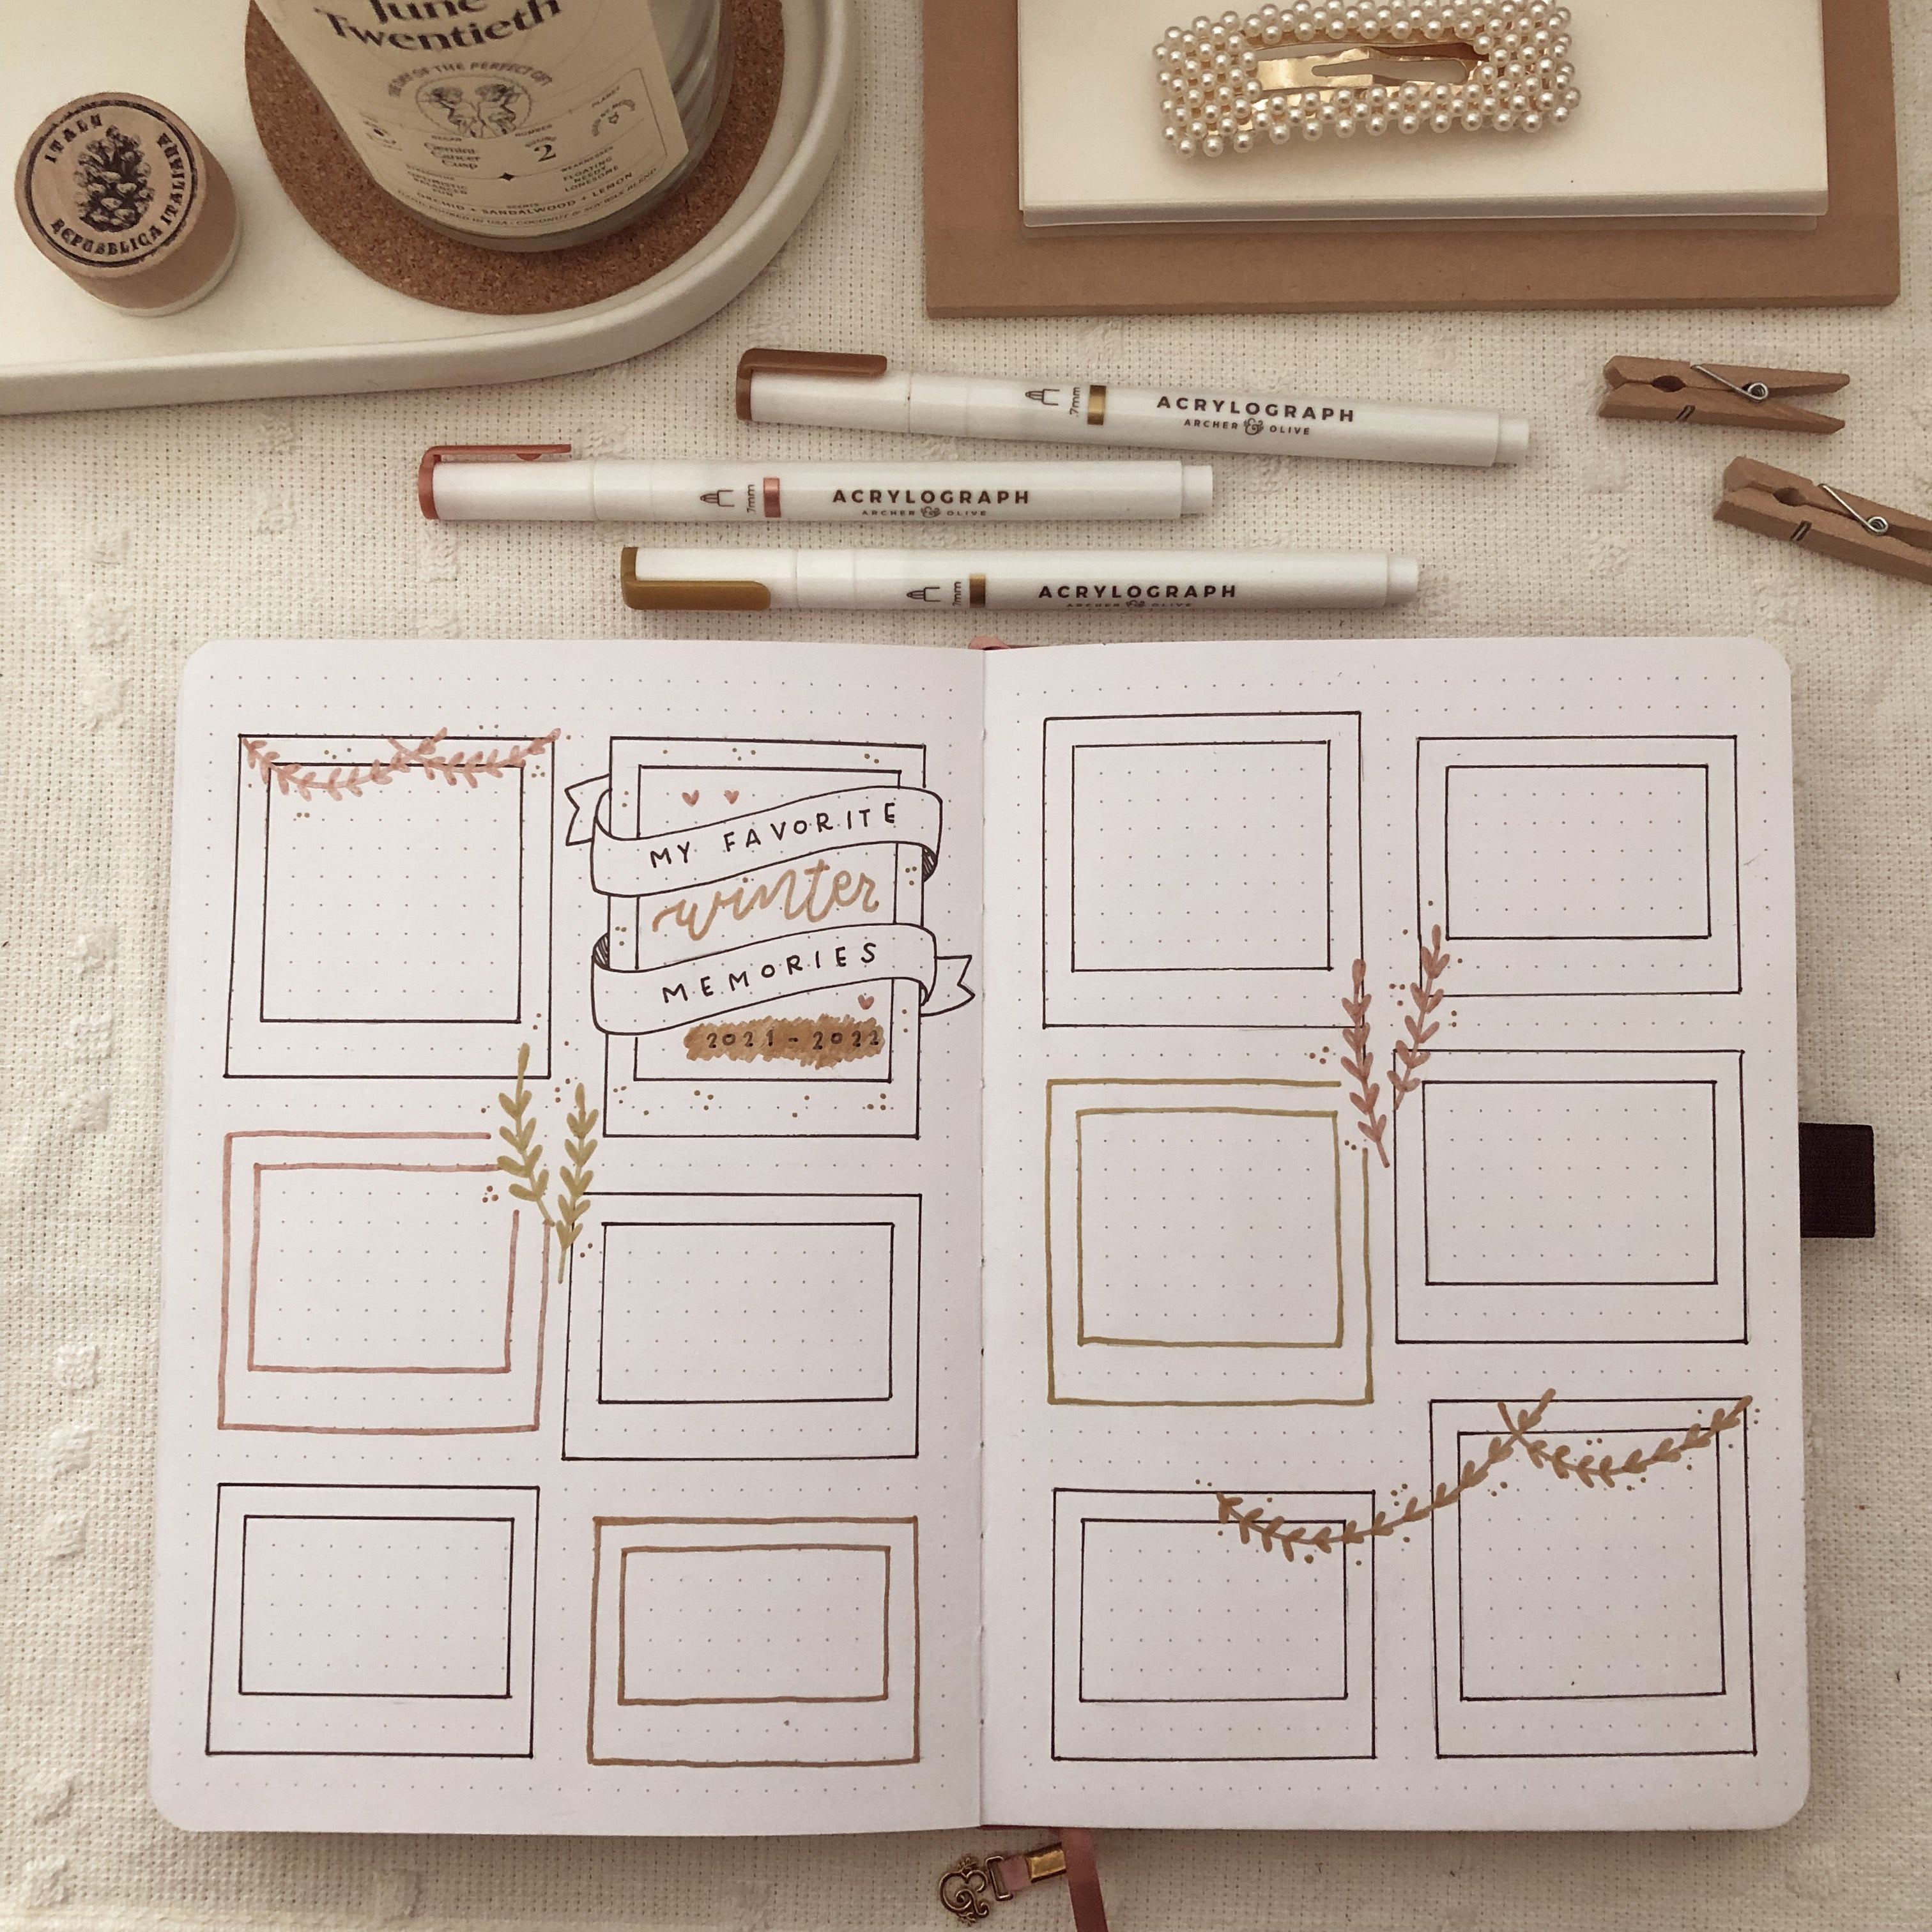 5 Essential Bullet Journal Supplies Every BuJo Enthusiast Needs